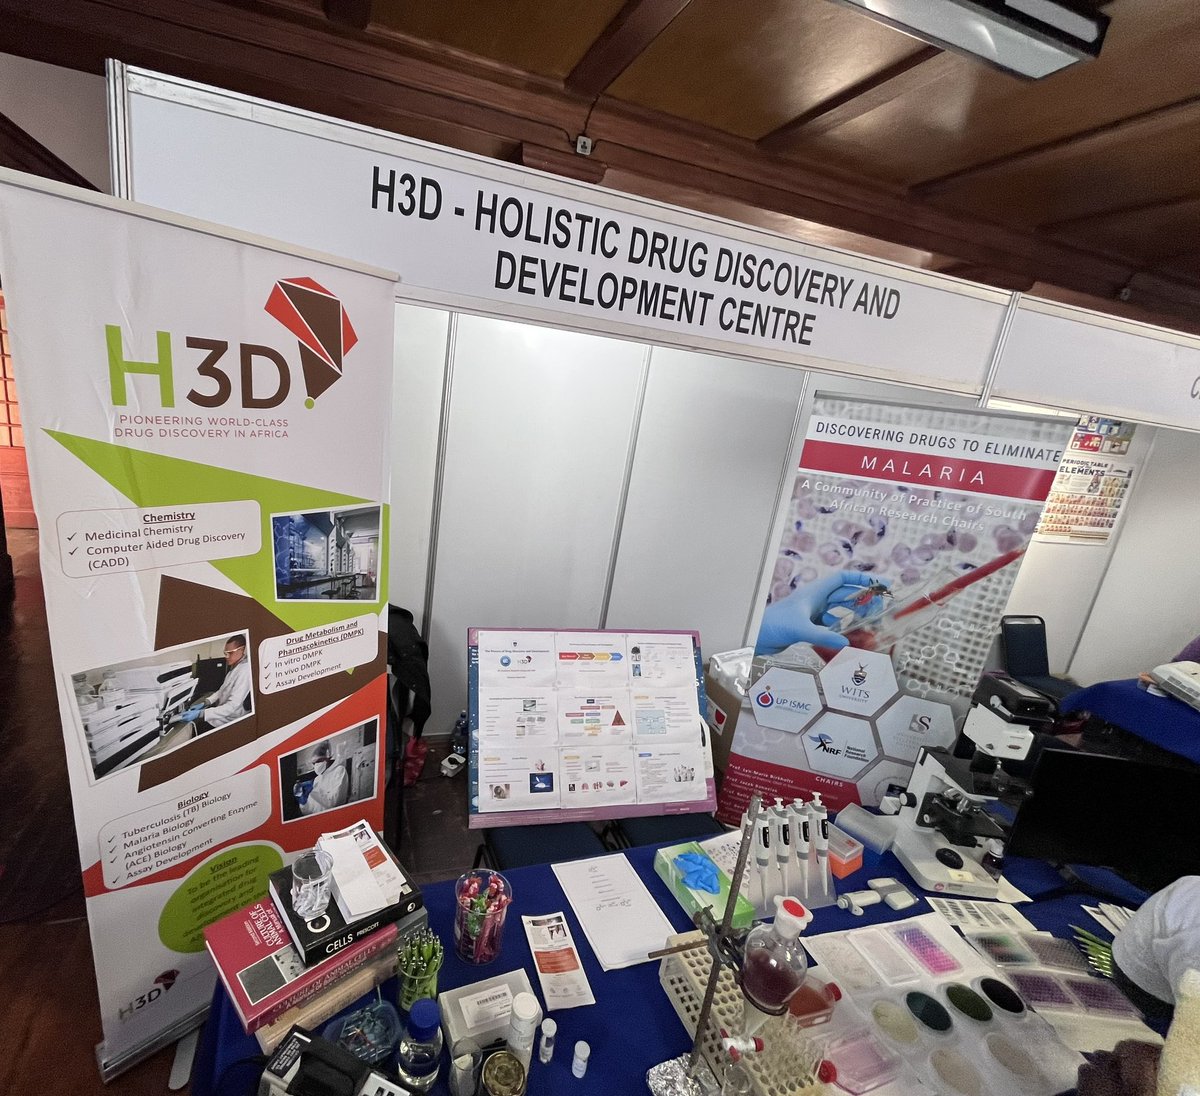 Interested in learning what we do? Do visit us @H3D_UCT @Kelly_Chibale #UCT_Open_day